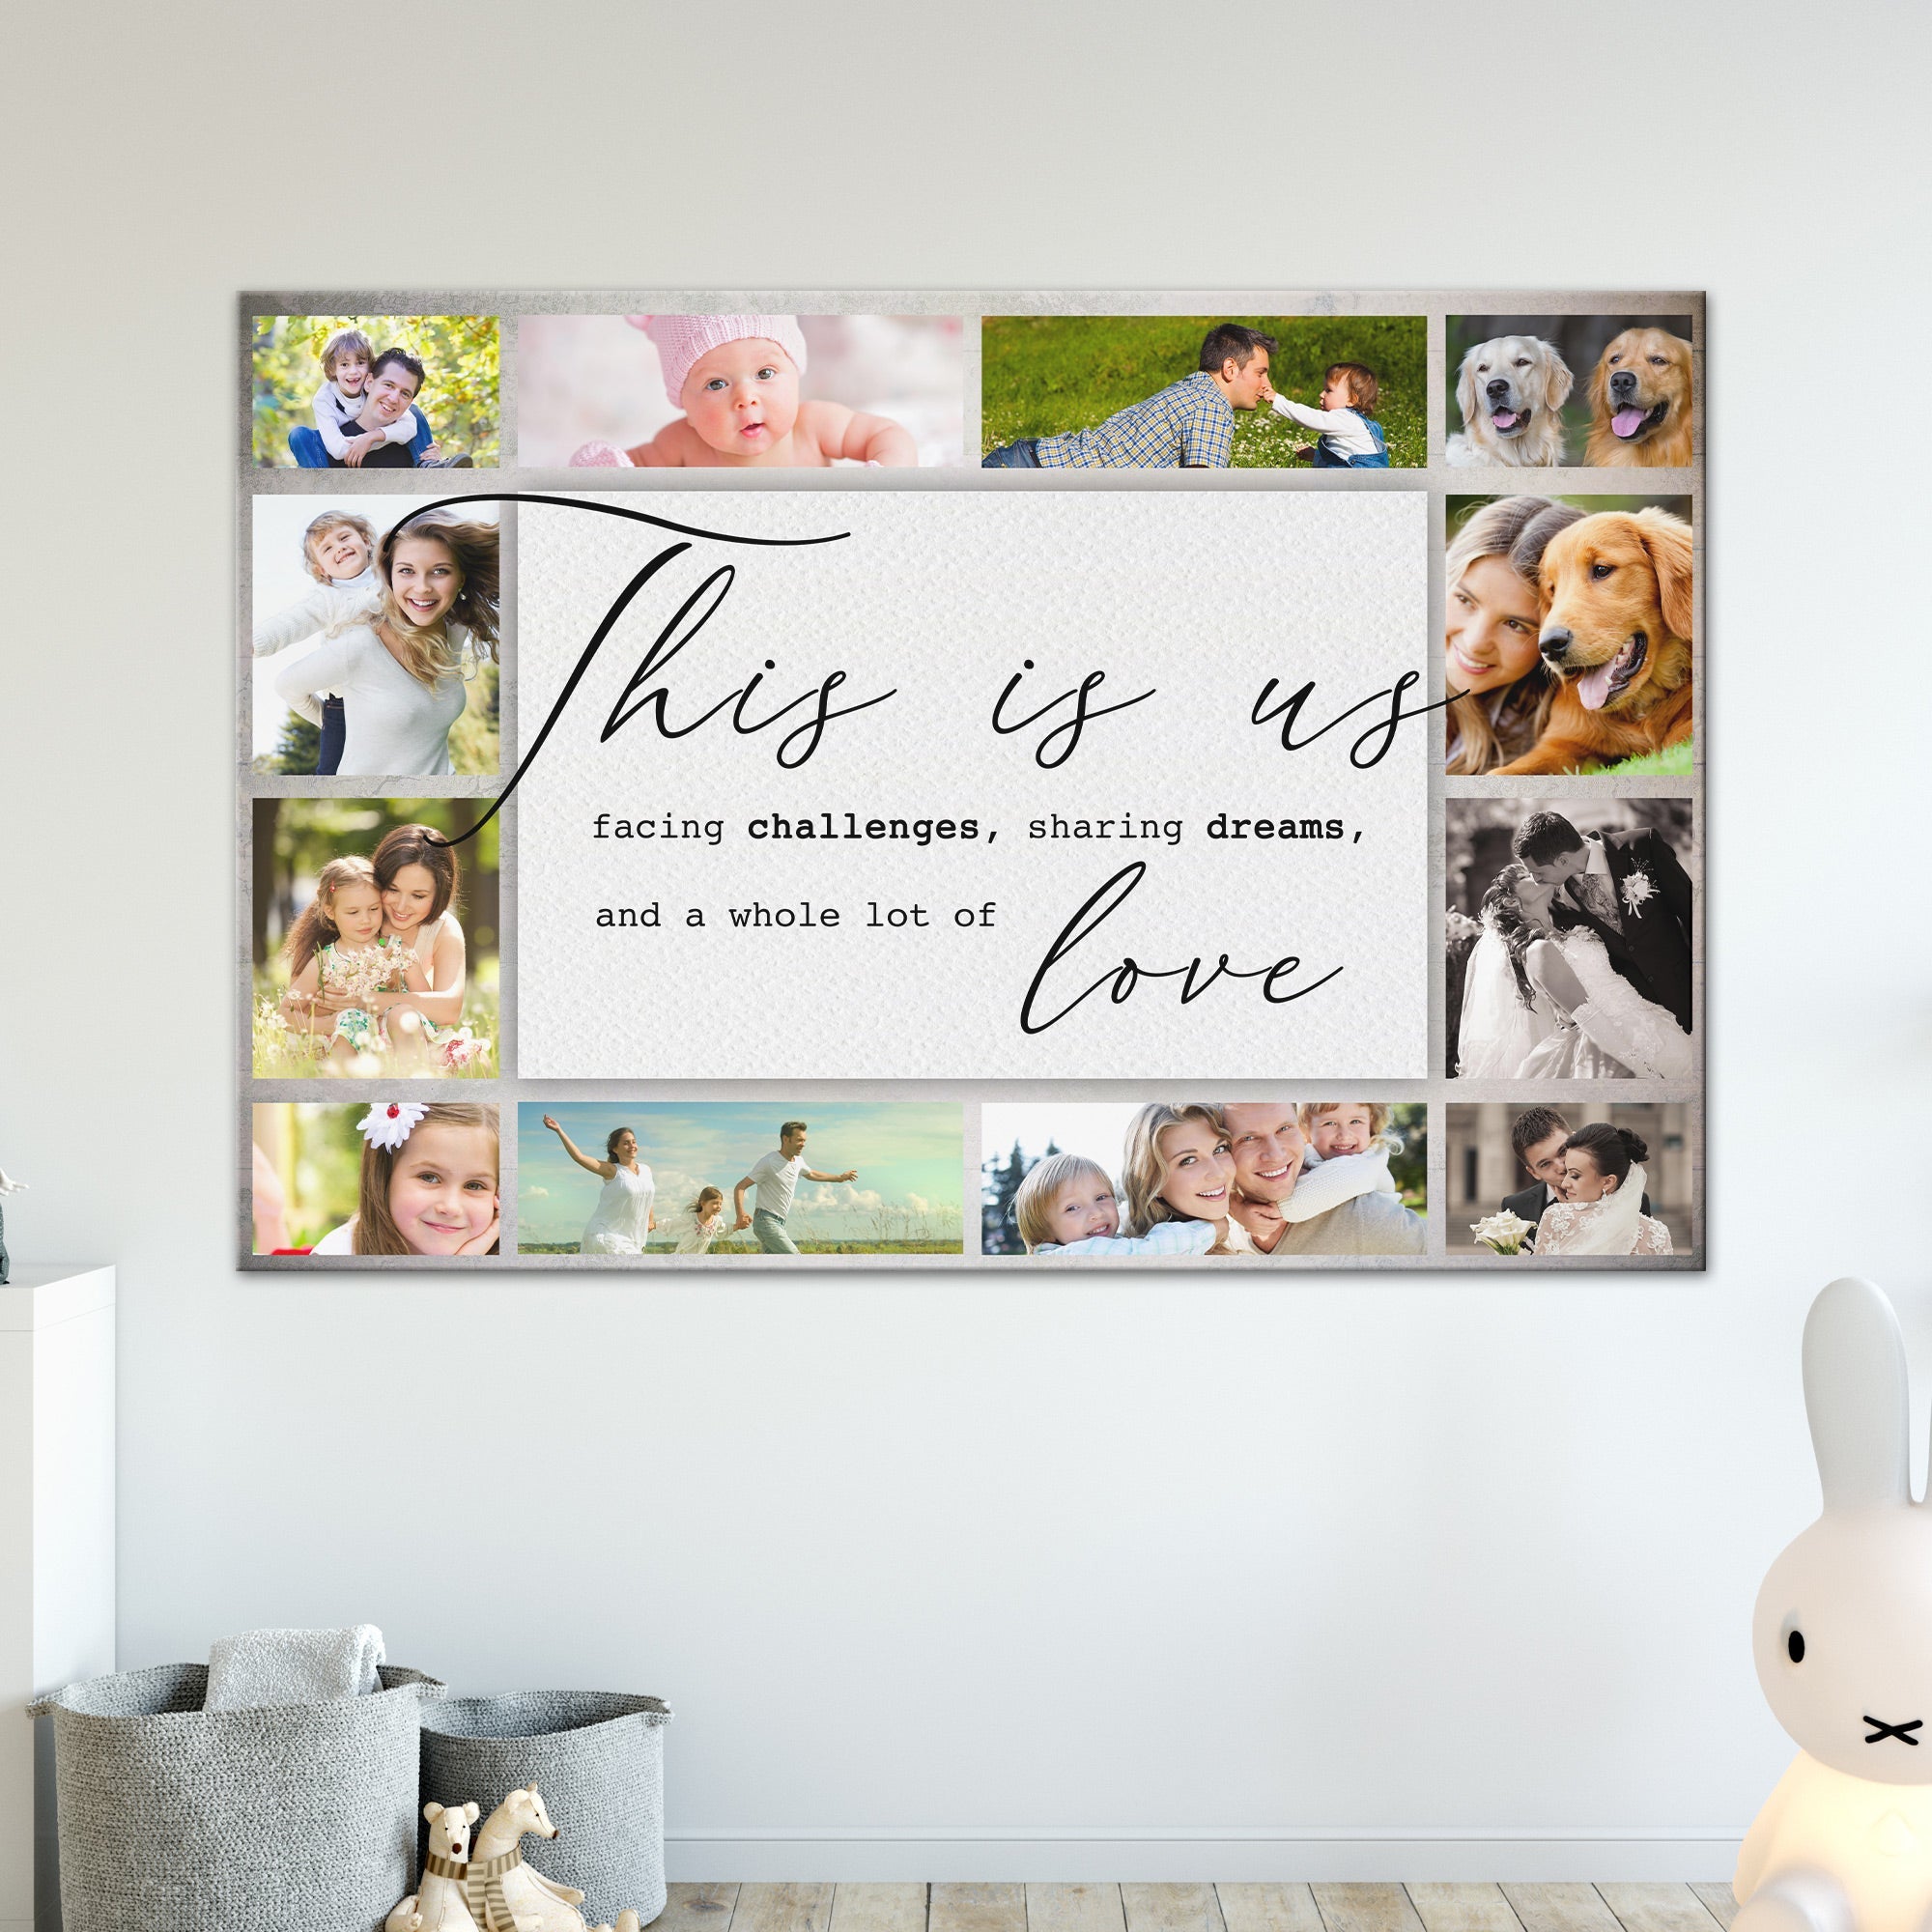 Personalized "This is us" Family Photos Background Canvas Print